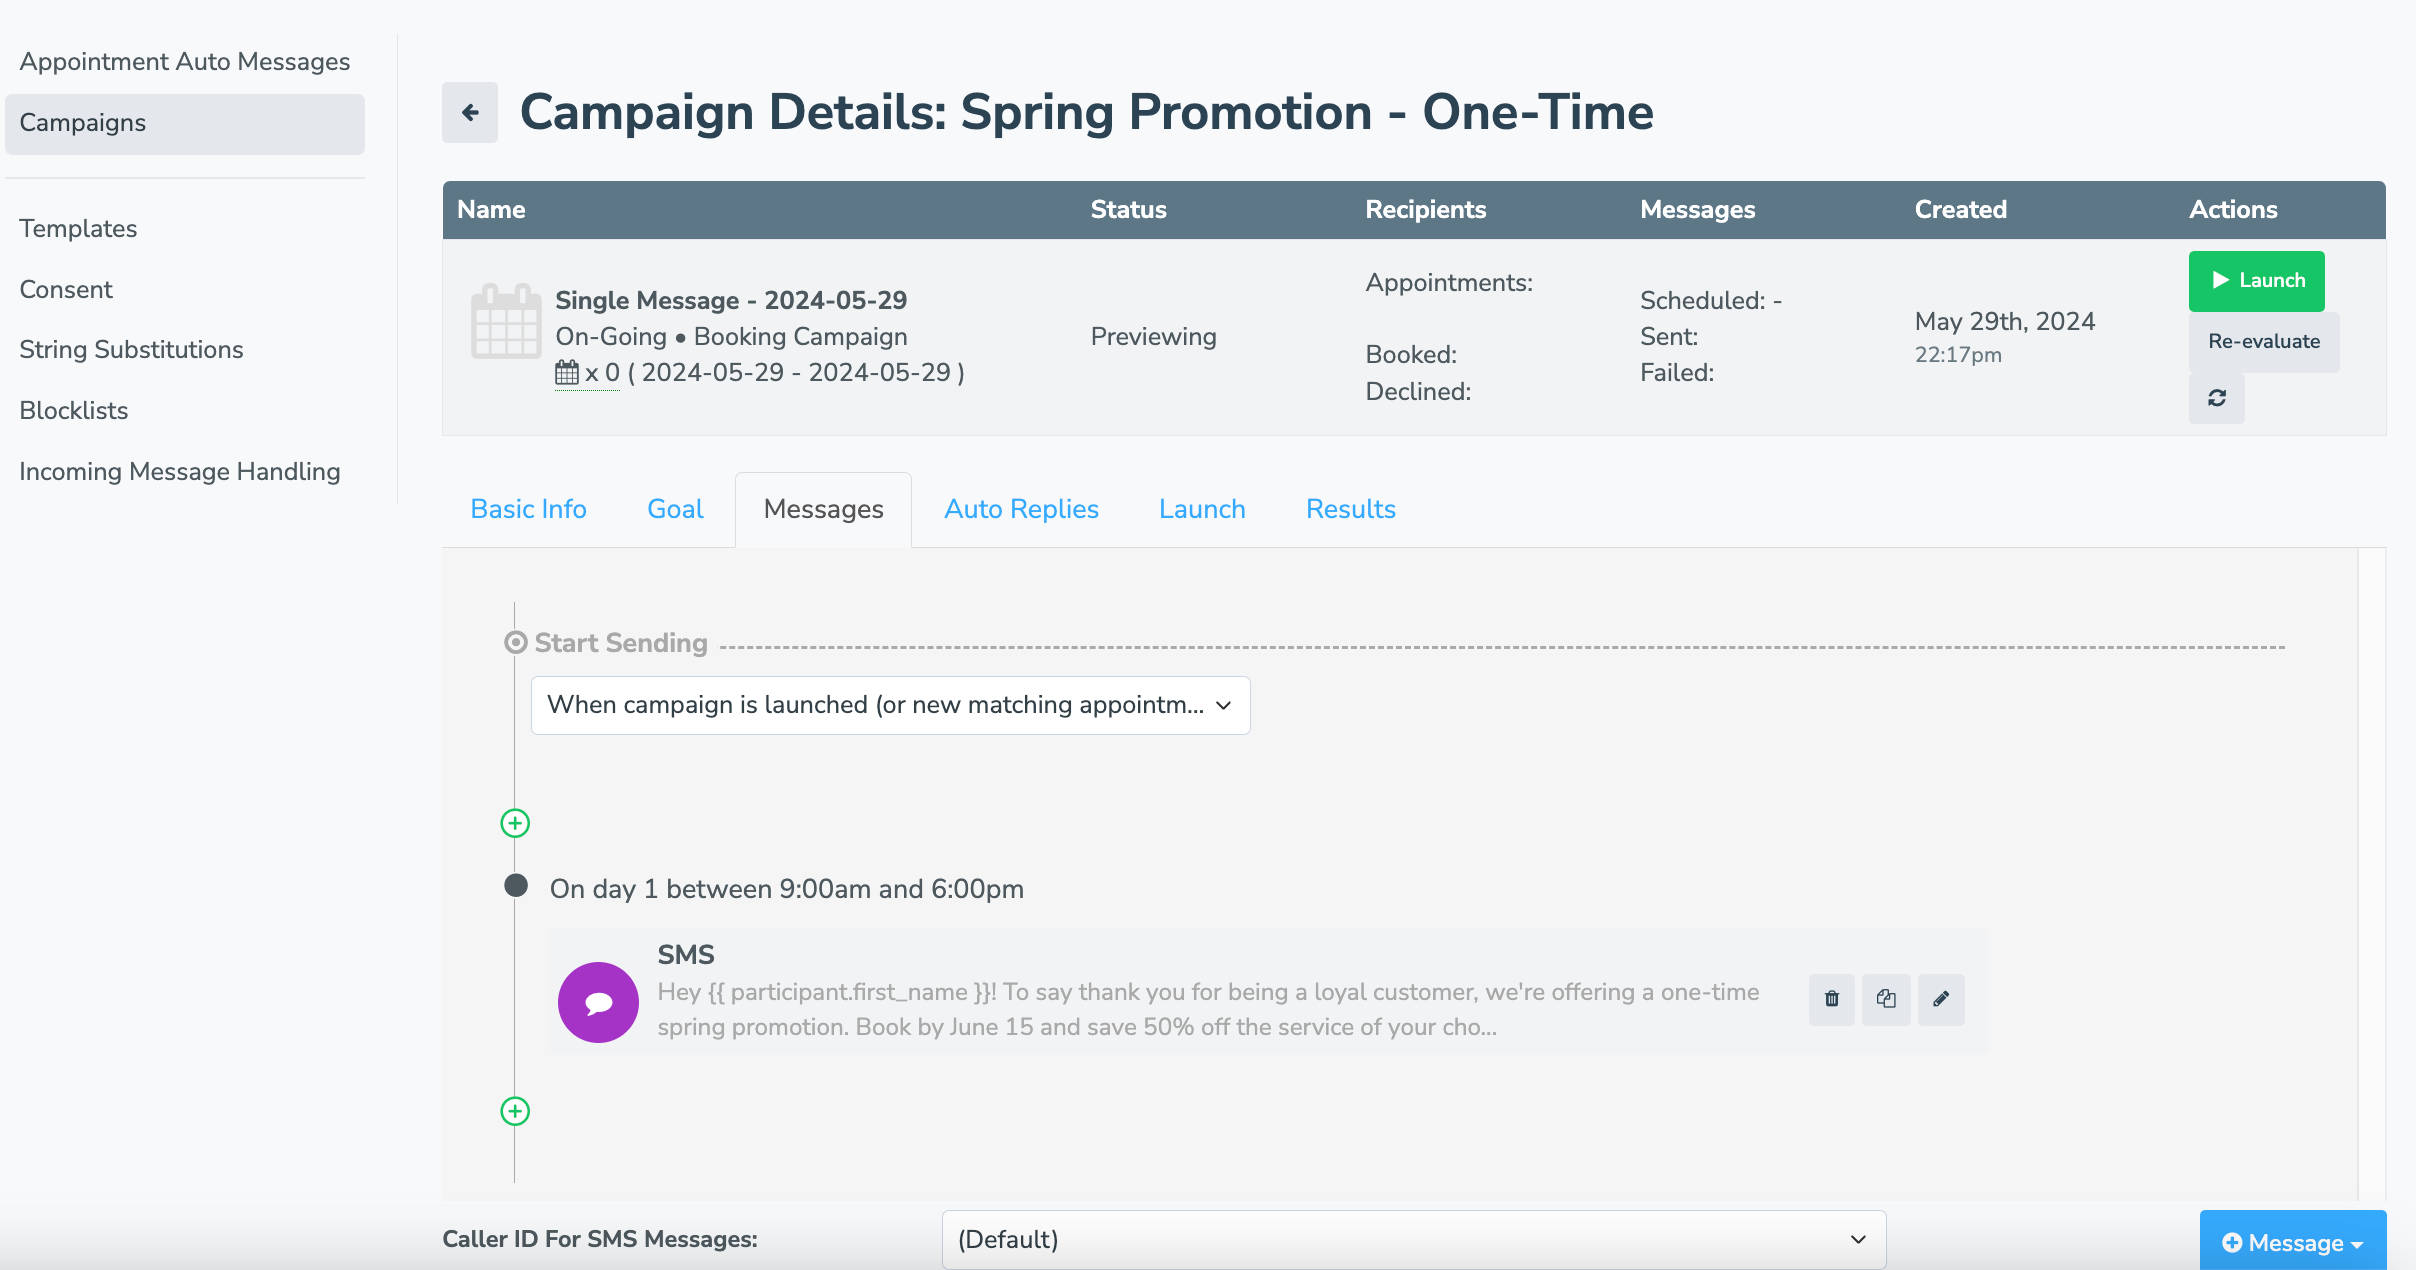 Send a single message blast to clients using the campaigns feature in Apptoto.